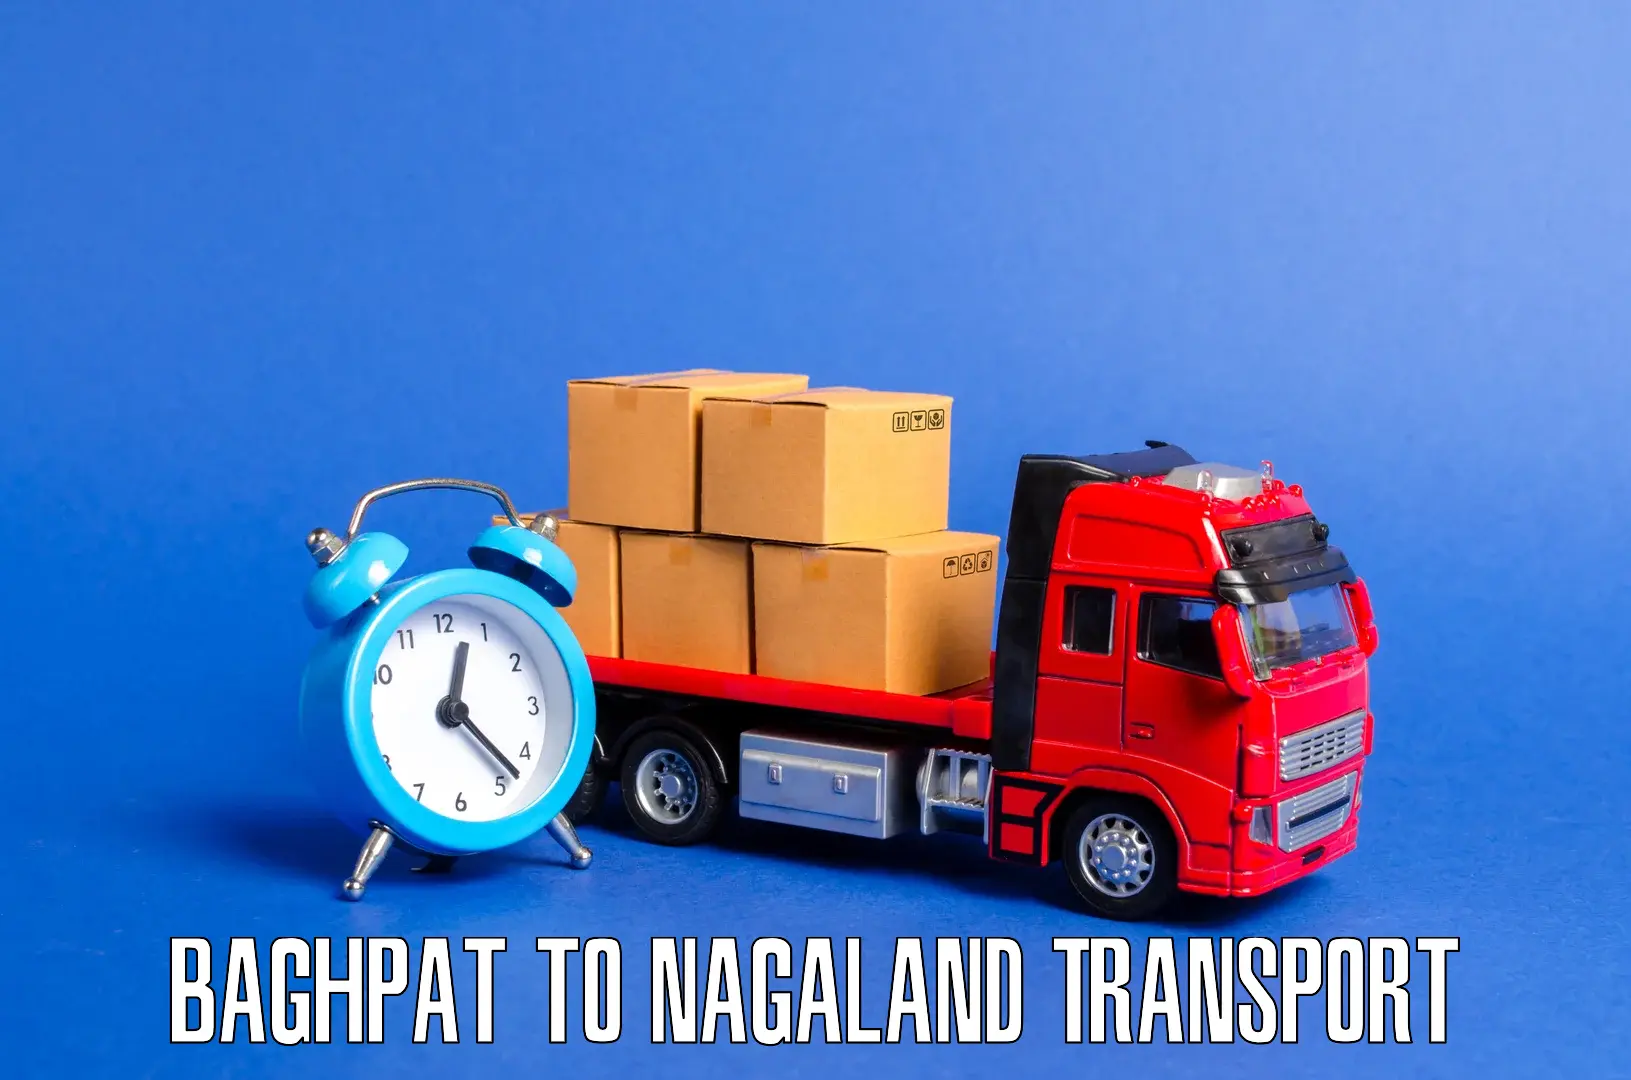 Pick up transport service in Baghpat to Dimapur